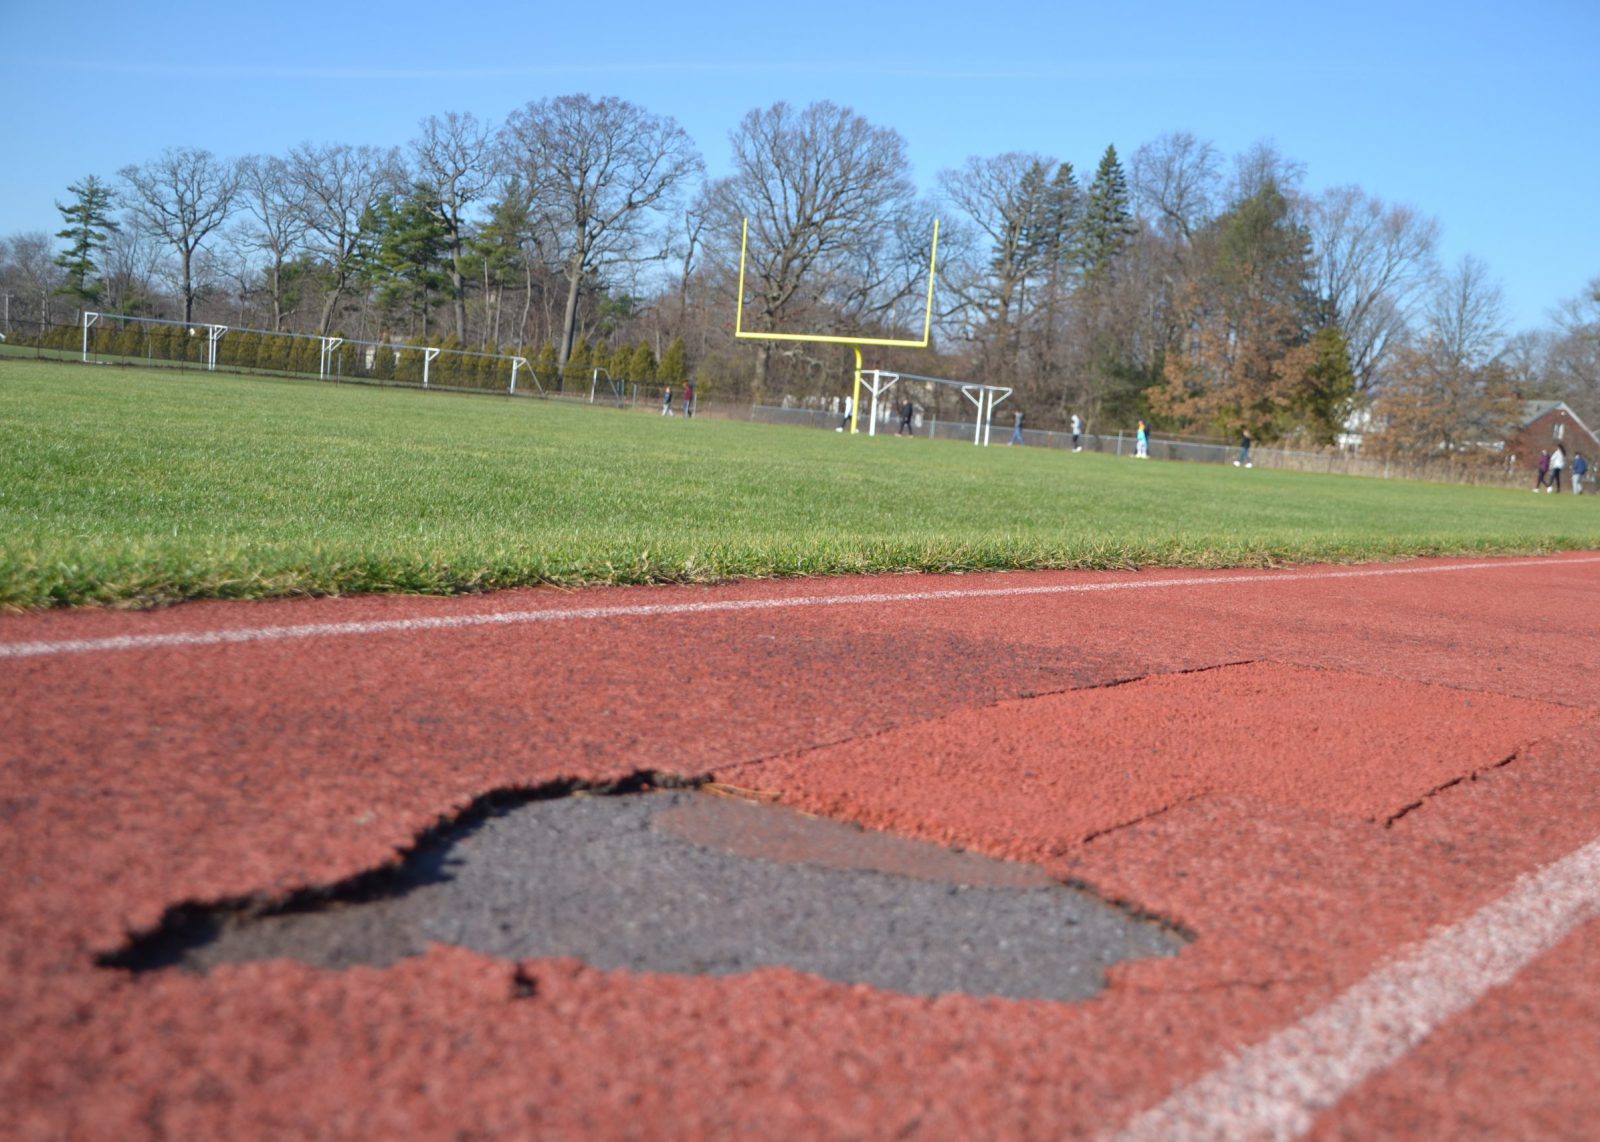 High school track showing deterioration